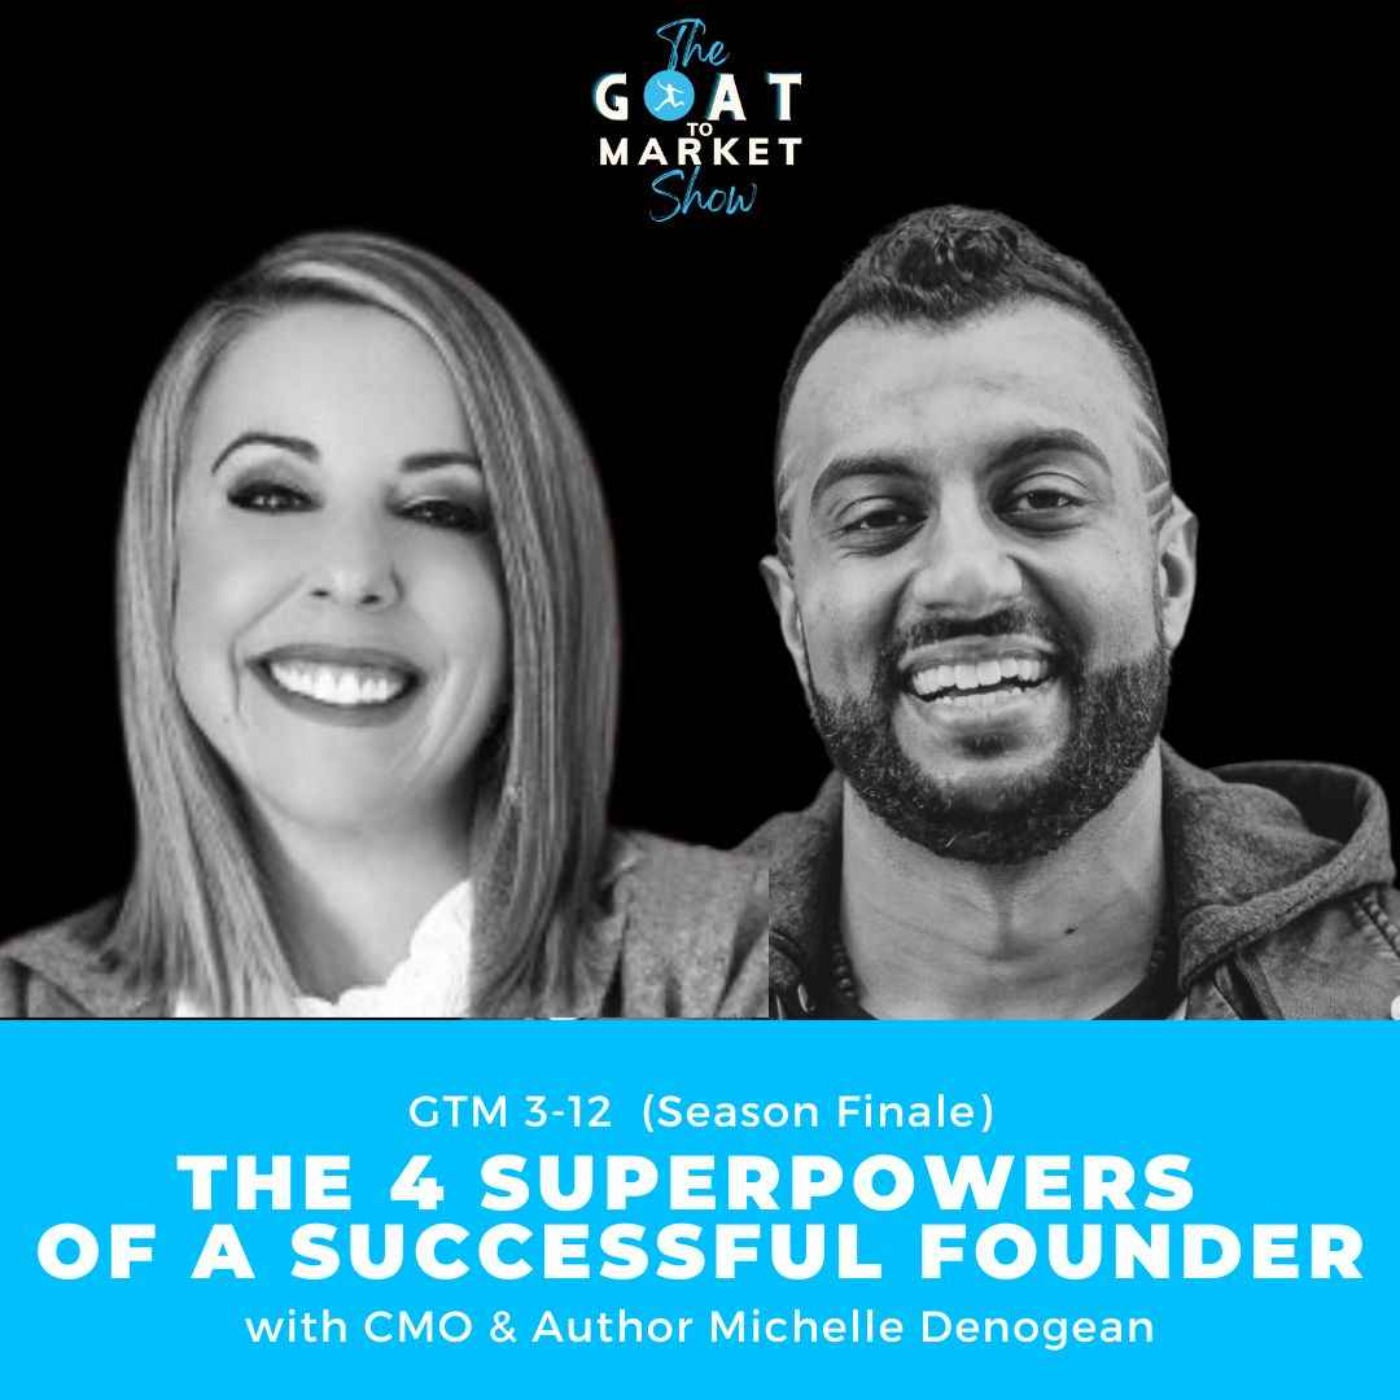 GTM 3-12: The 4 Superpowers of a Successful Founder with CMO & Author Michelle Denogean (Season Finale!)